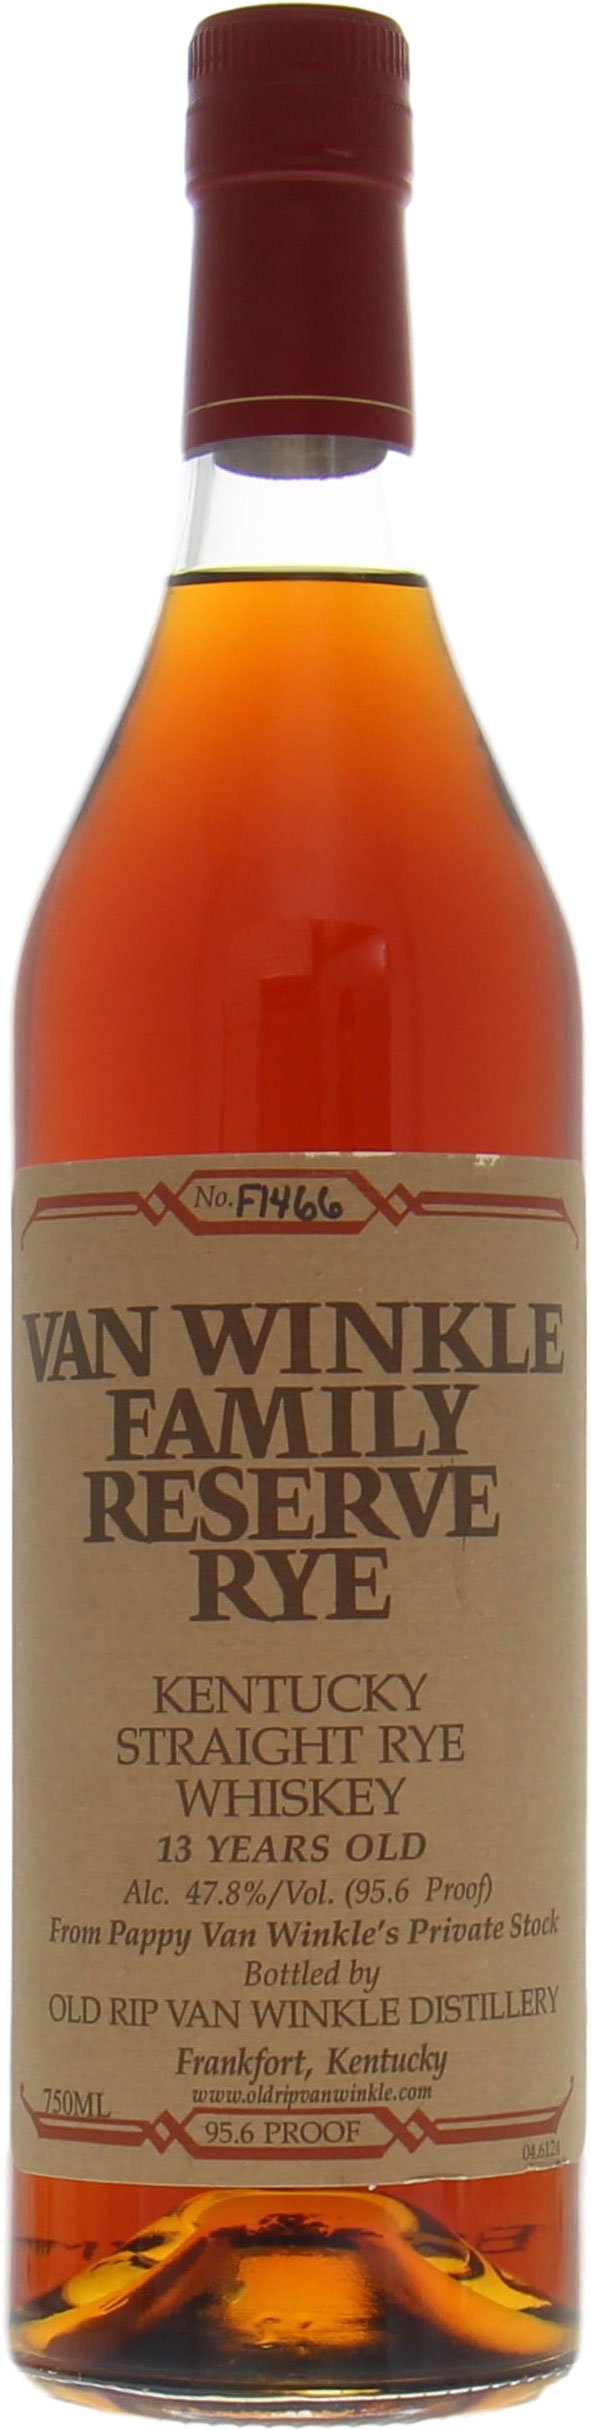 Van Winkle - Rye 13 Years Old Family Reserve No. F1466 95.6 Proof 47.8% NV Perfect